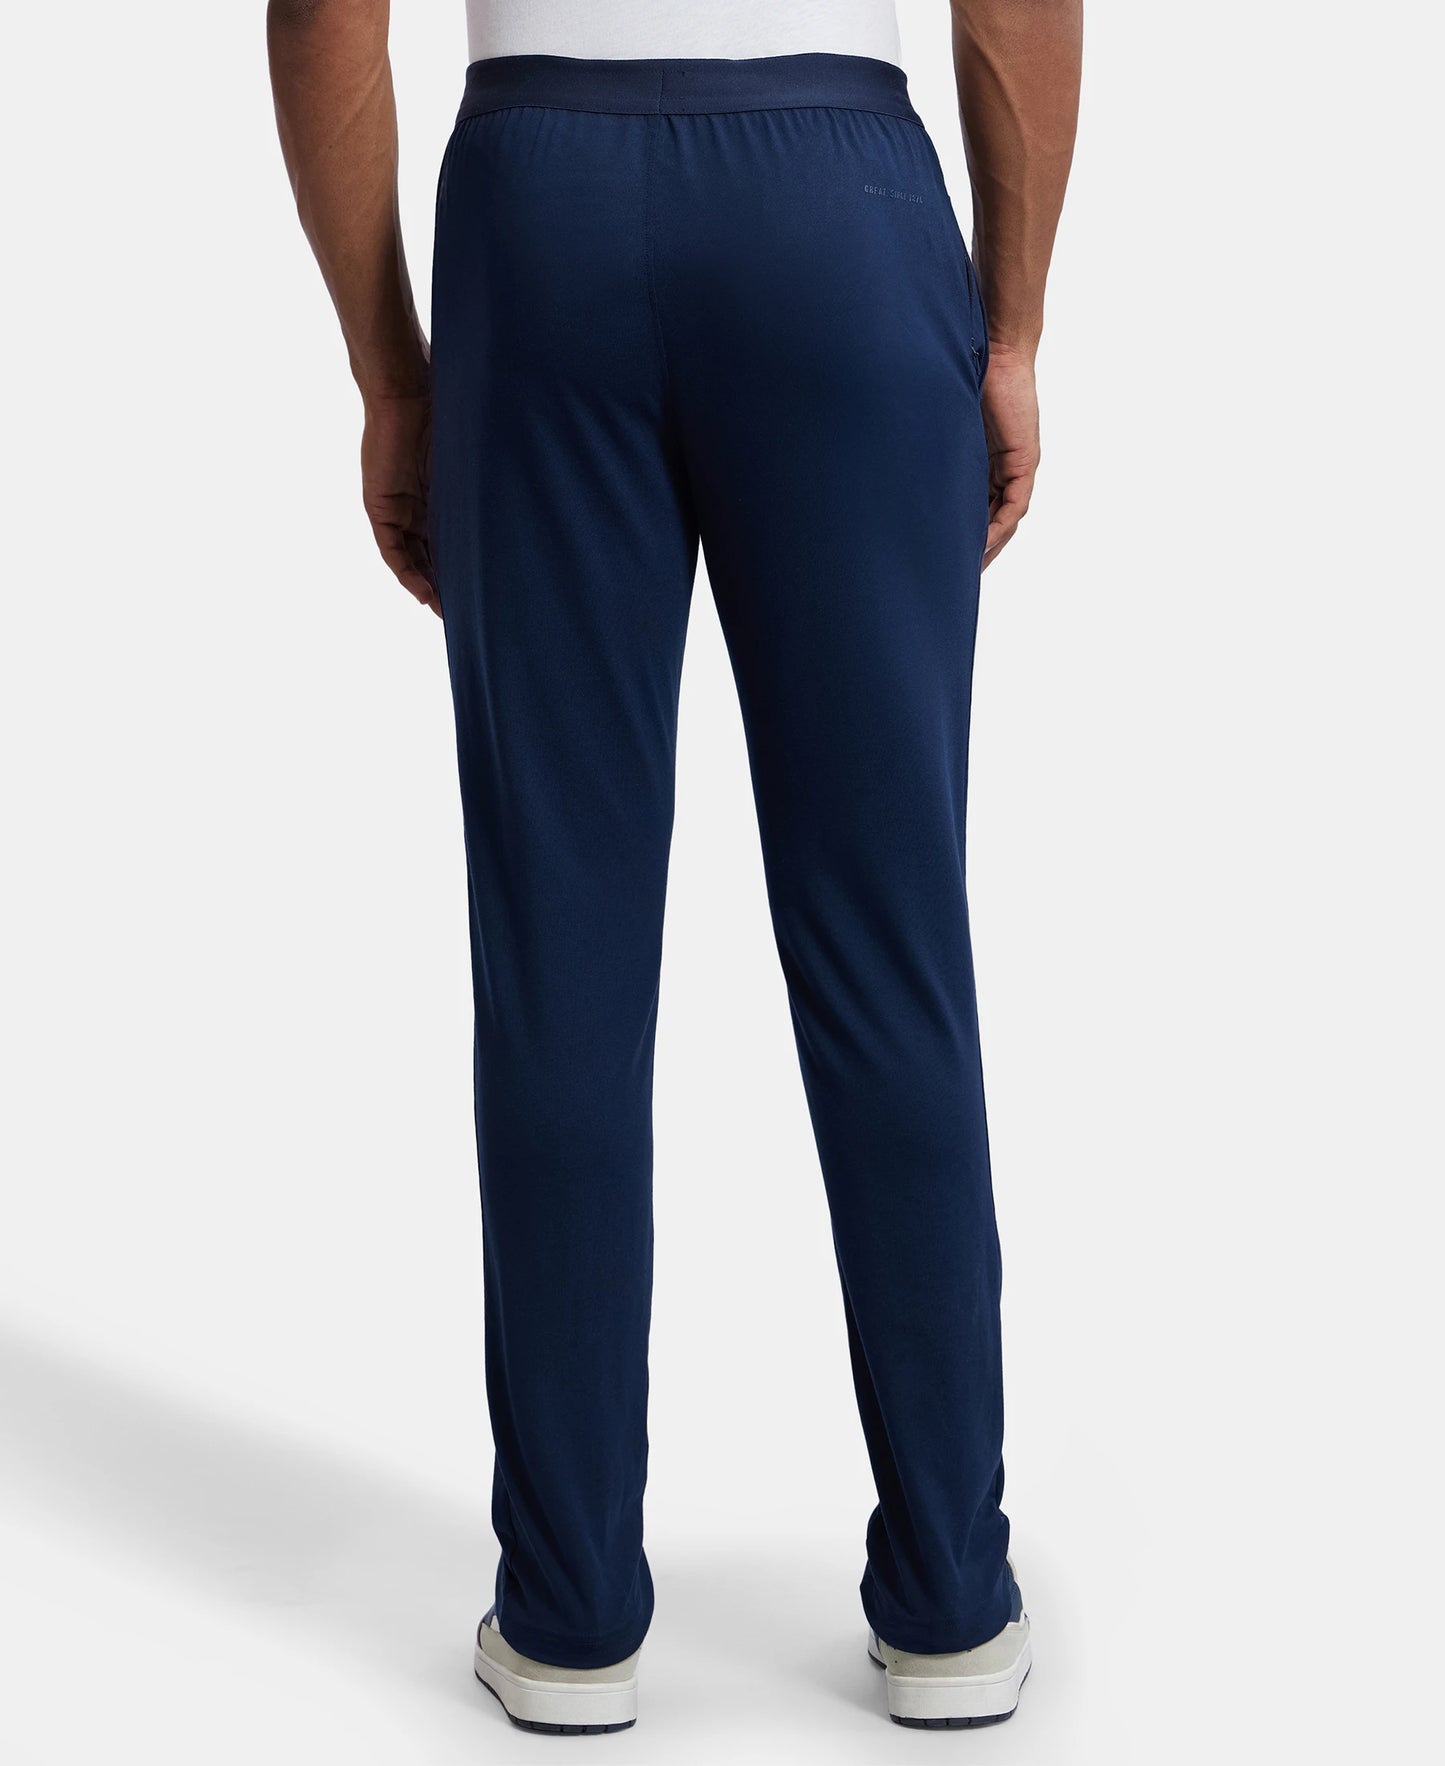 Super Combed Cotton Rich Slim Fit Trackpants with Side and Zipper Media Pockets  - Navy-3